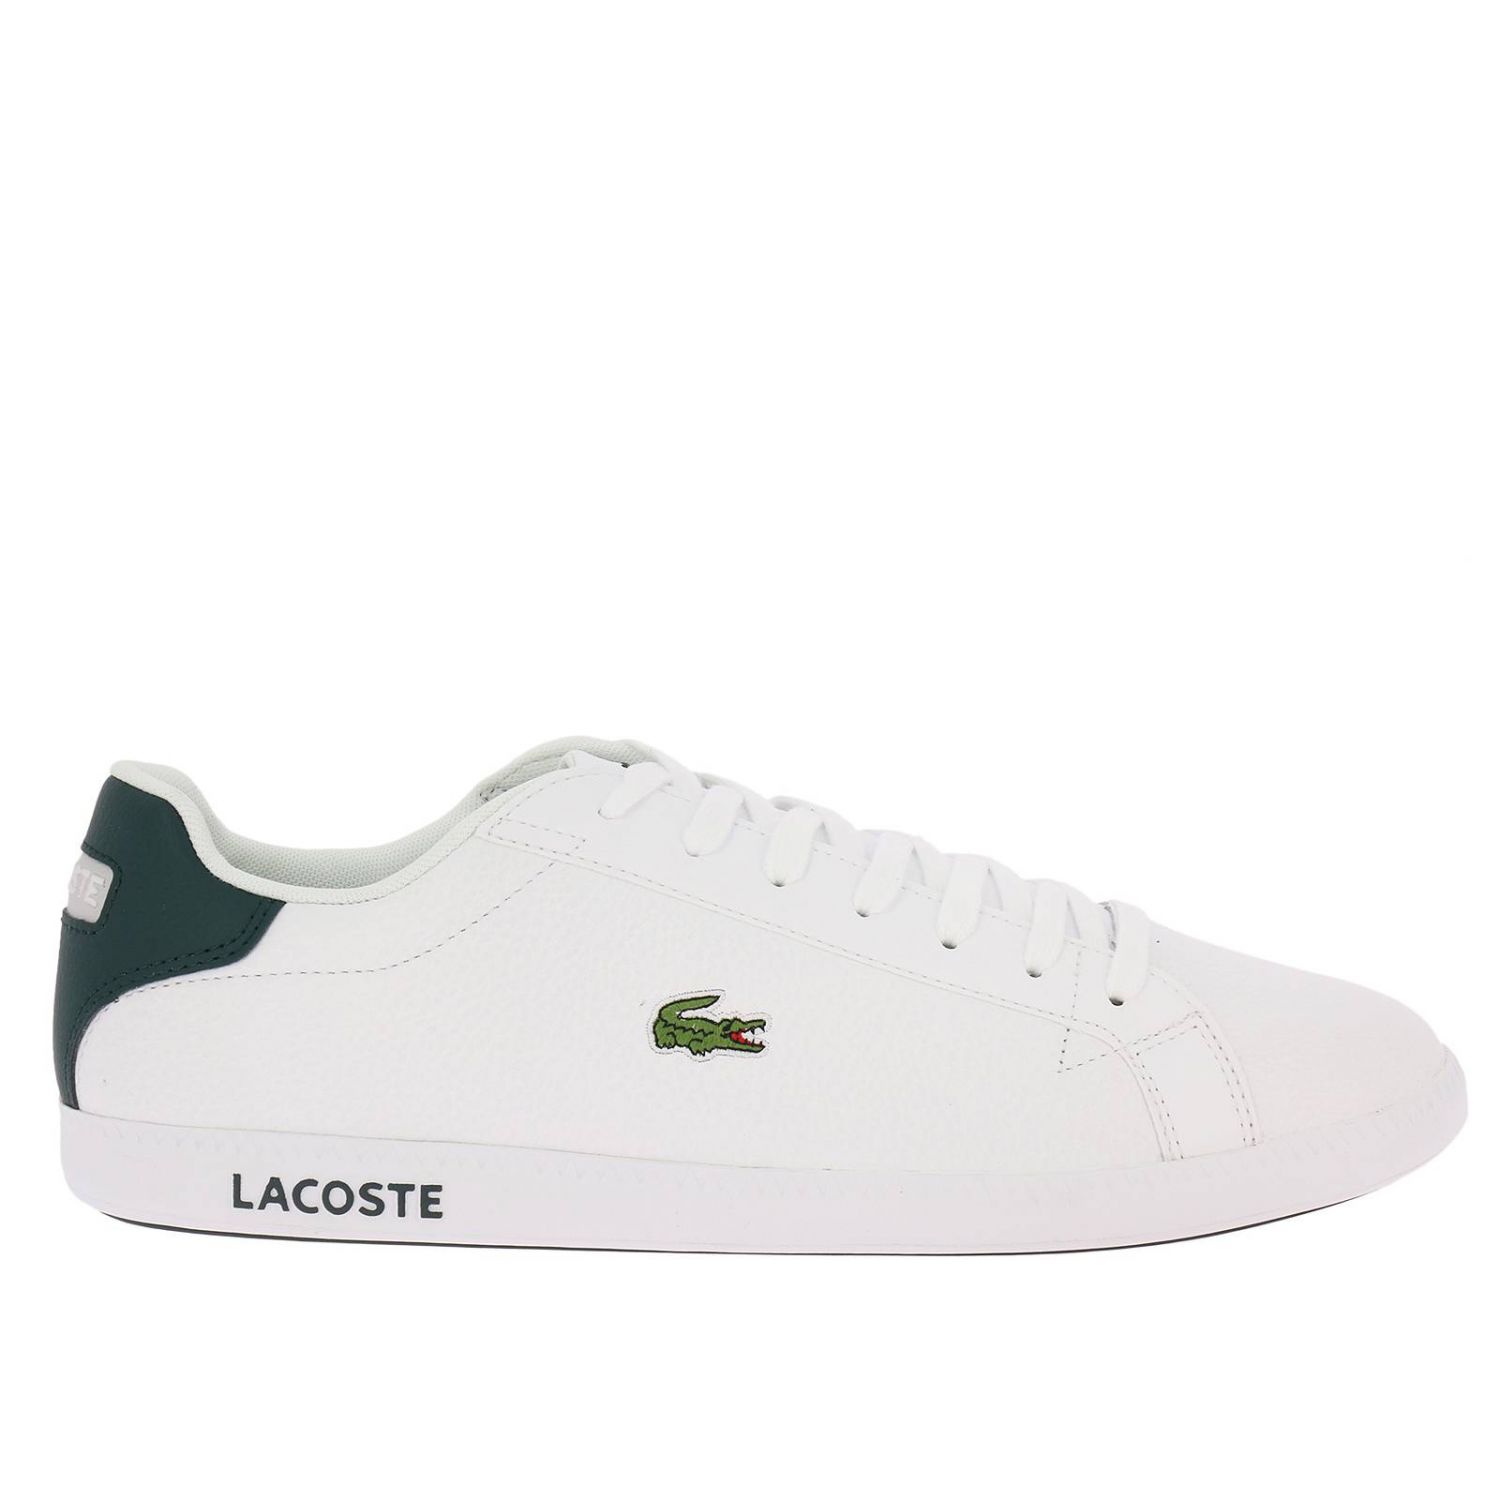 white sneakers for men lacoste